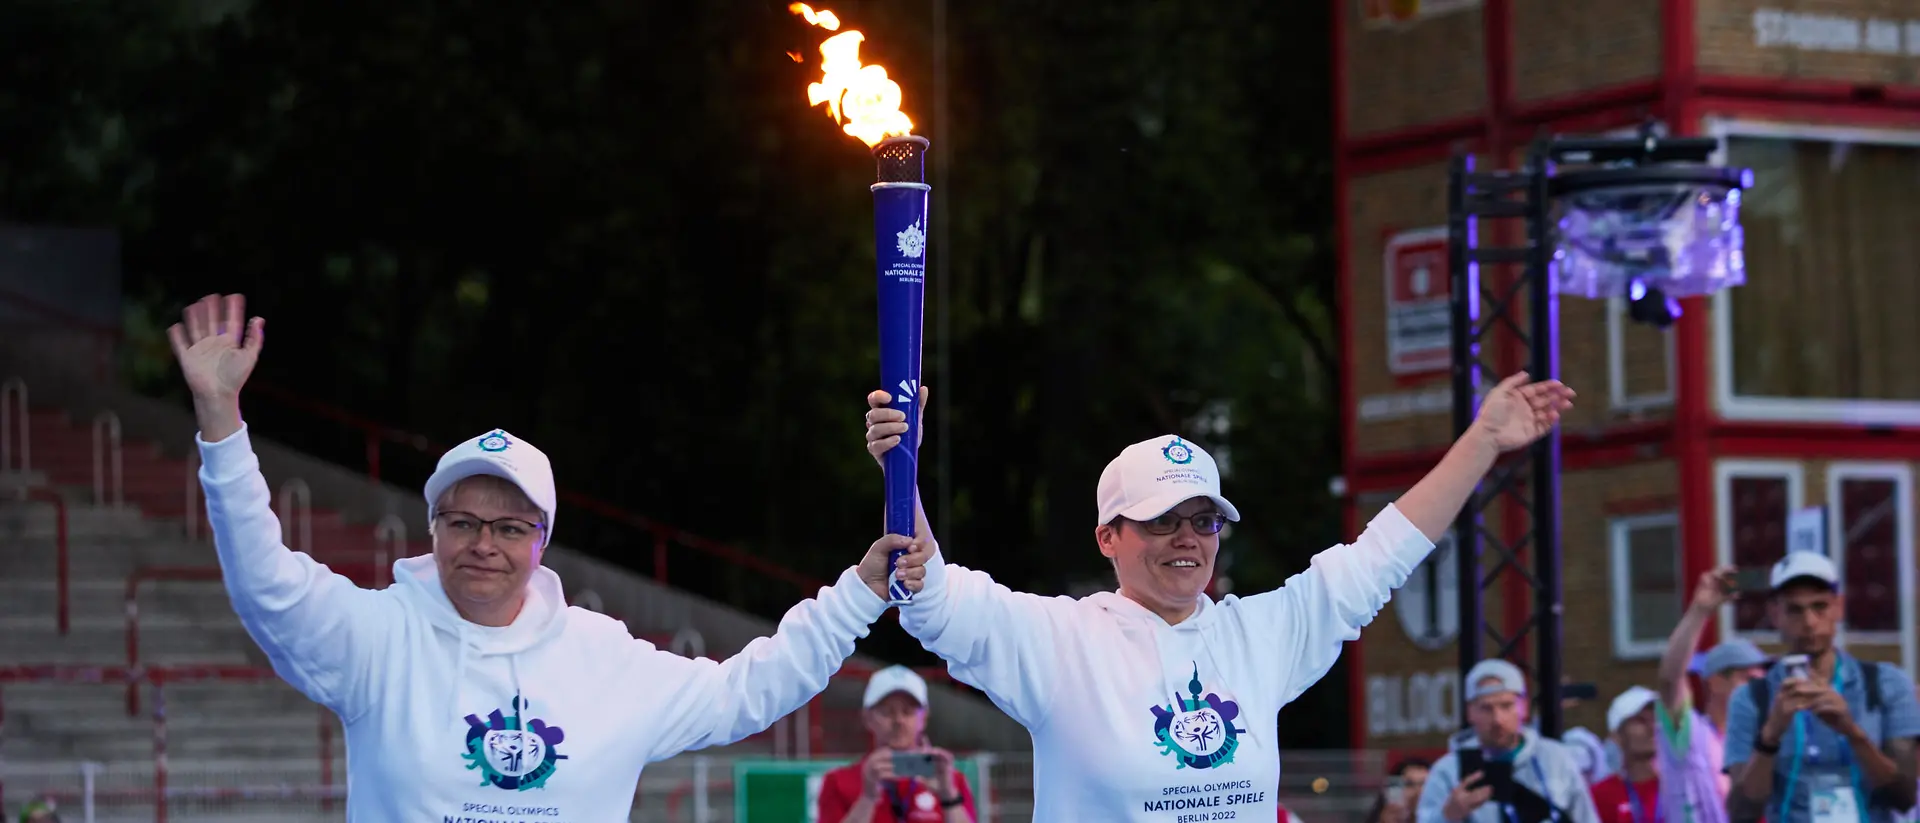 Two volunteers carry the Special Olympics Flame.